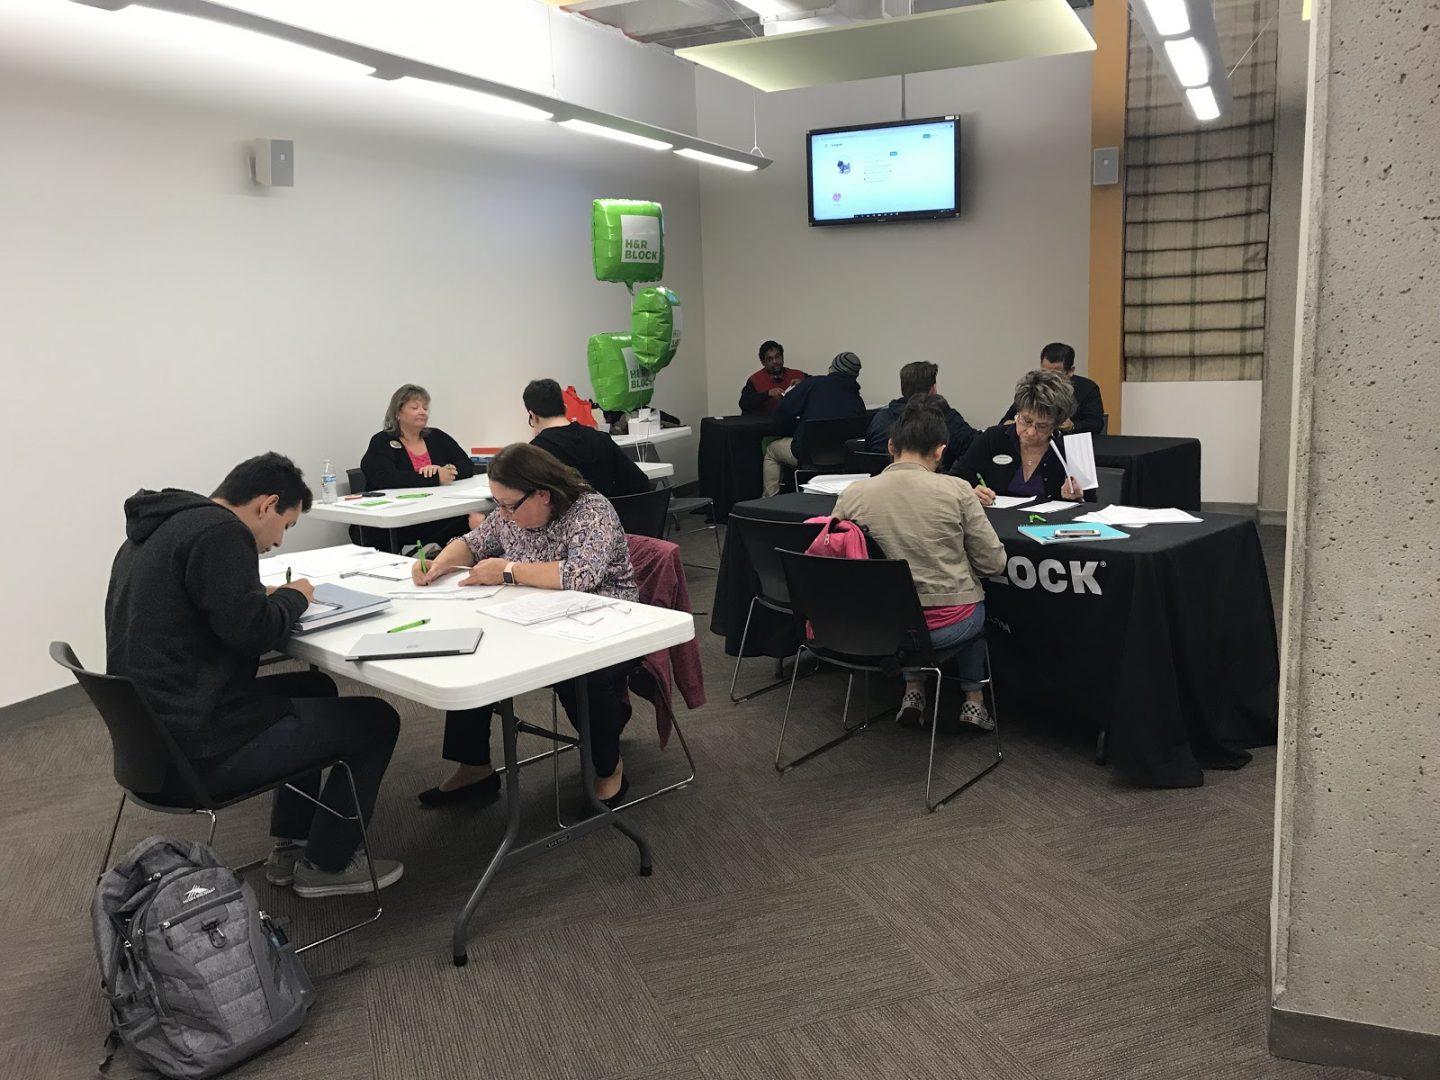 Students get help preparing their taxes from H&R Block members during the Love and Taxes event, hosted by Fresno State’s Money Management Center on Feb. 14. (Vanessa Rios/The Collegian)